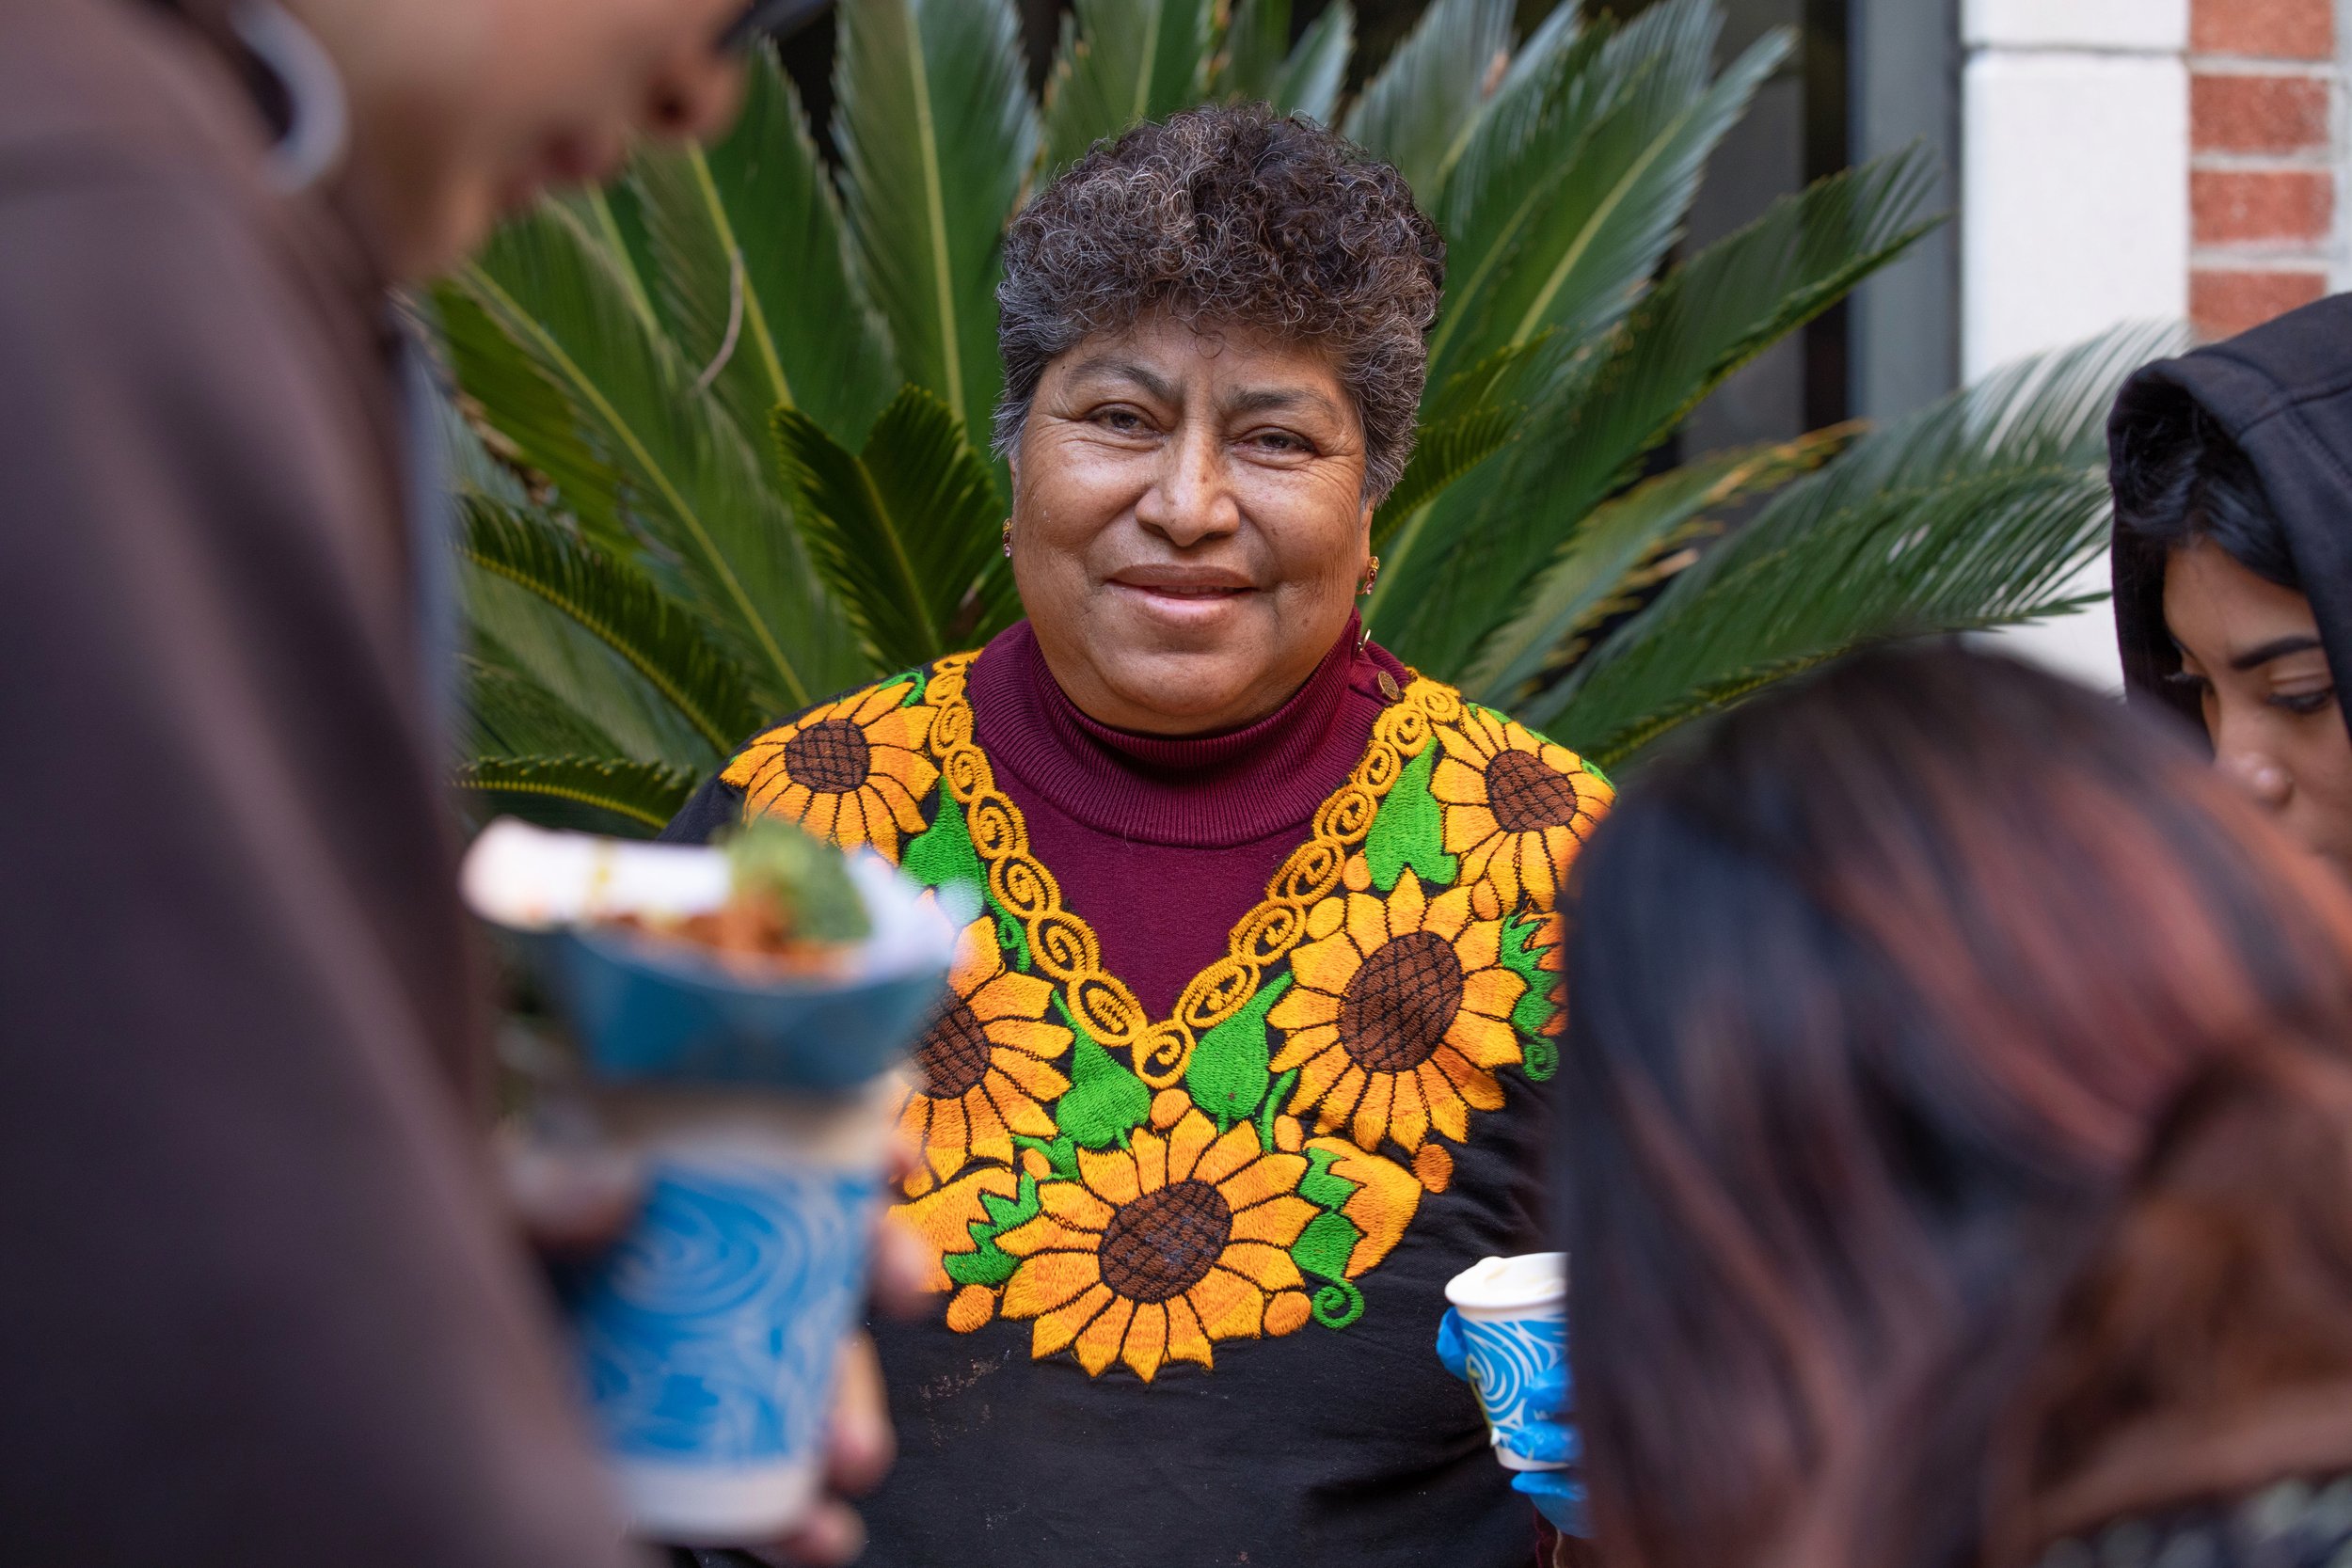  Abuelita Merced Sanchez, featured in the movie, making corn cups for teh attendees. Reception after the screening of the documentary “Abuelita’s Kitchen: Mexican Food Stories” inside the Fowler Museum at UCLA main campus, Calif. March, Saturday 4, 2